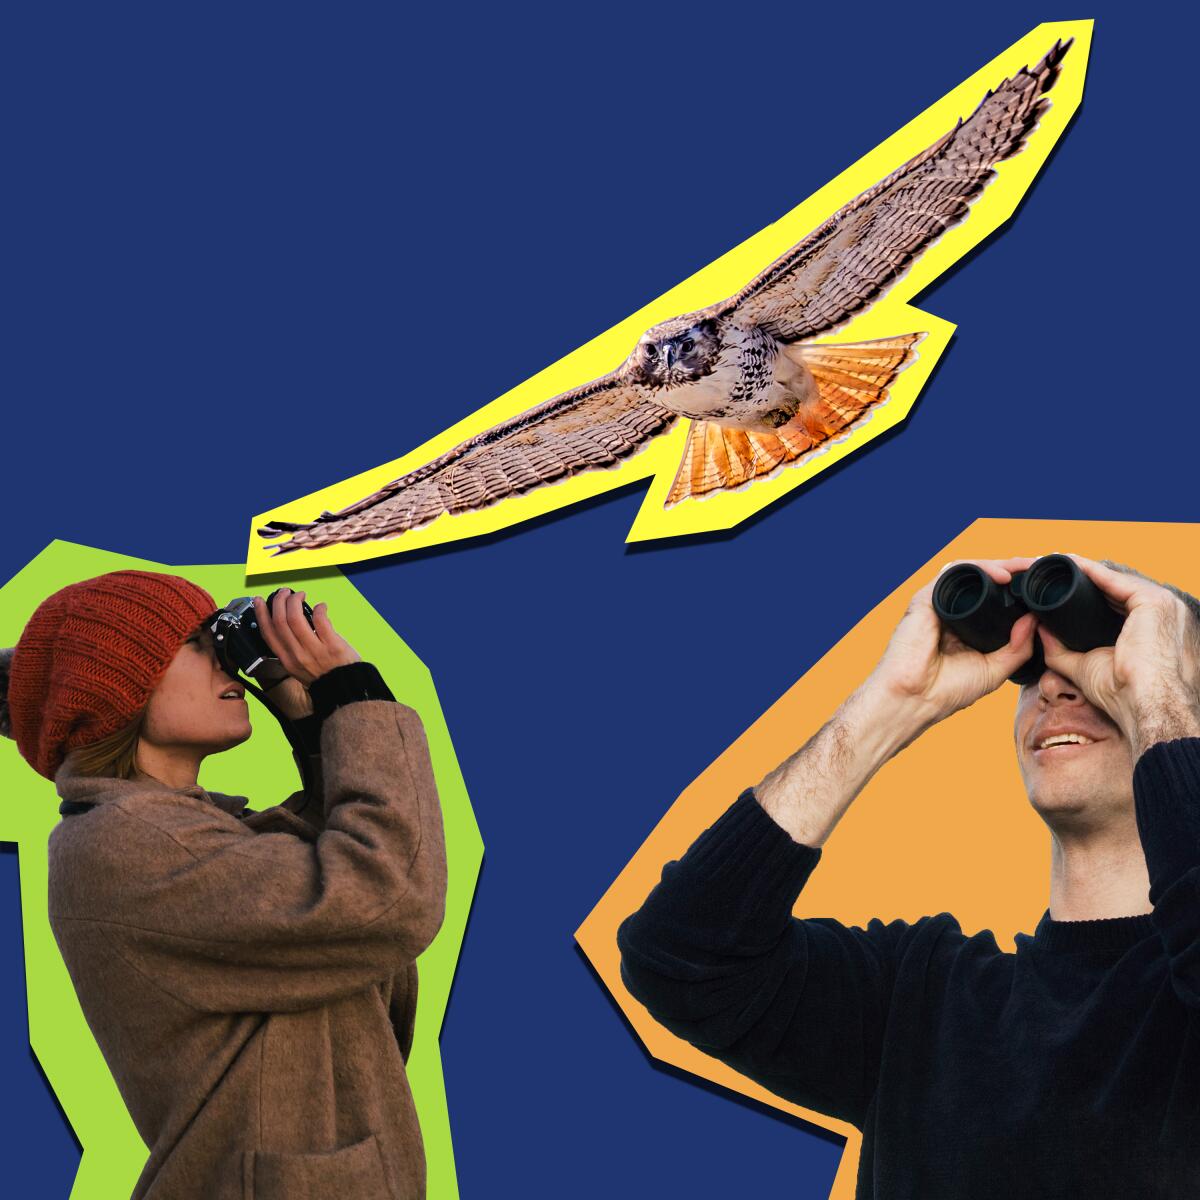 Illustration shows a hawk with outstretched wings and two people looking at the sky with binoculars.